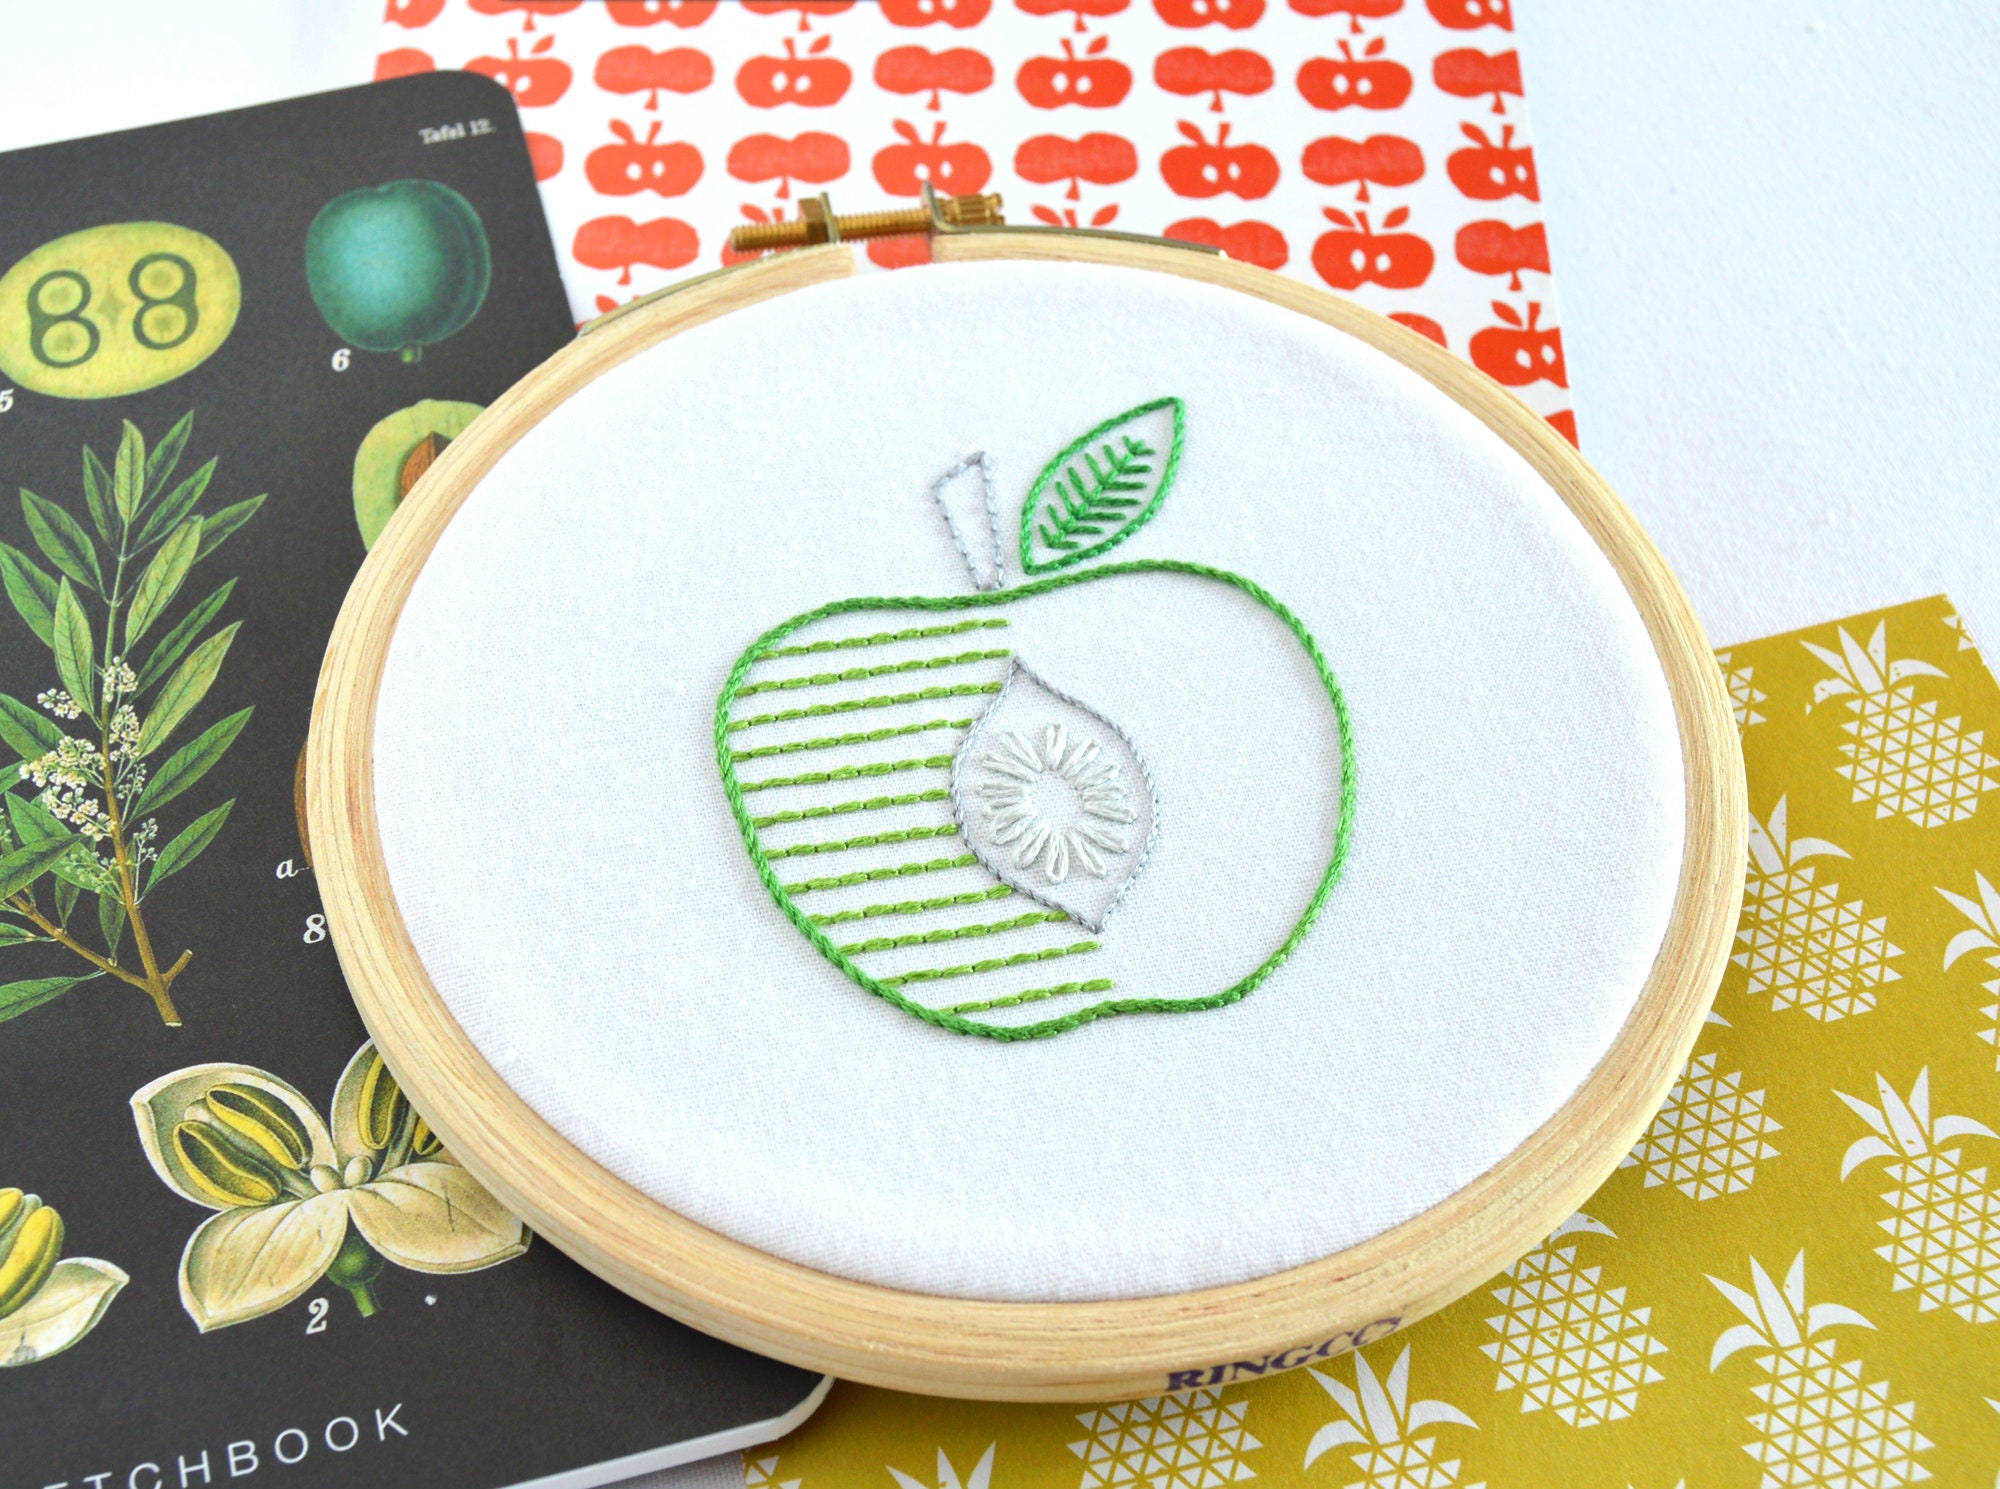 Hand Embroidery Needles Pack & Magnet by Sublime Stitching Apples